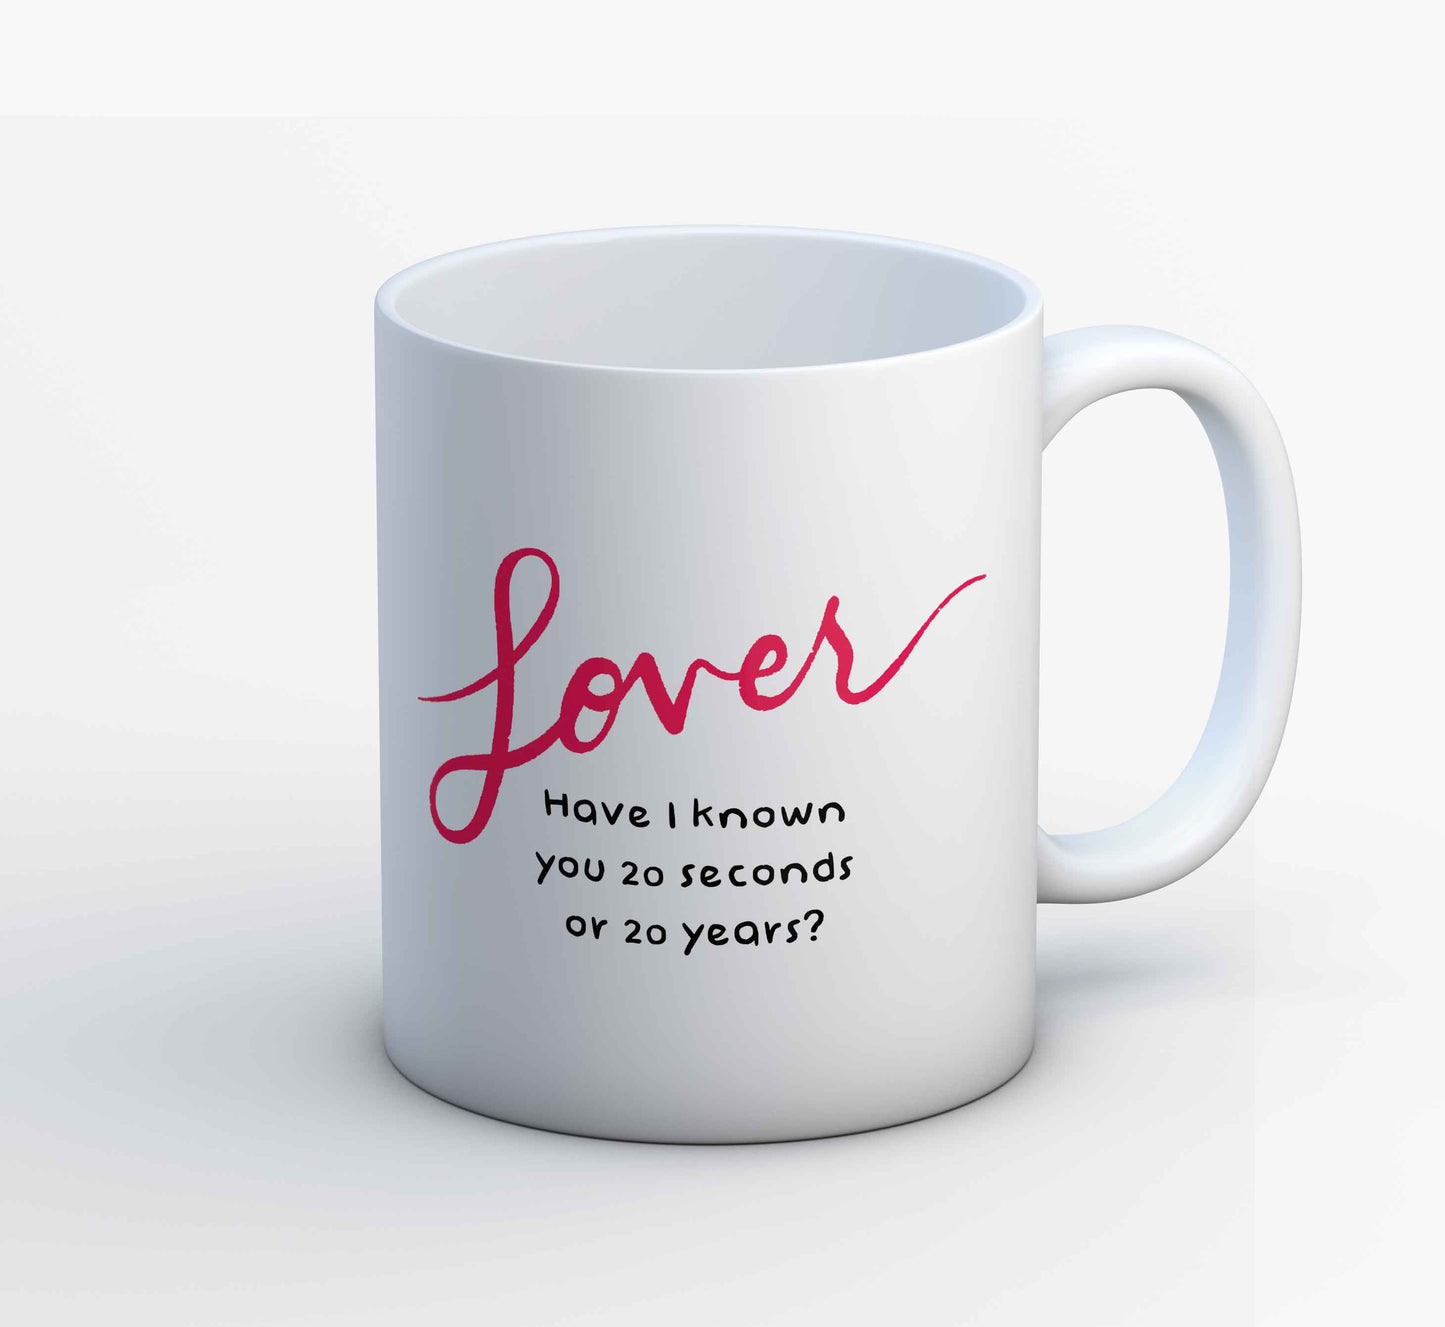 Buy Taylor Swift Mug - The Tale Of Tunes at 5% OFF 🤑